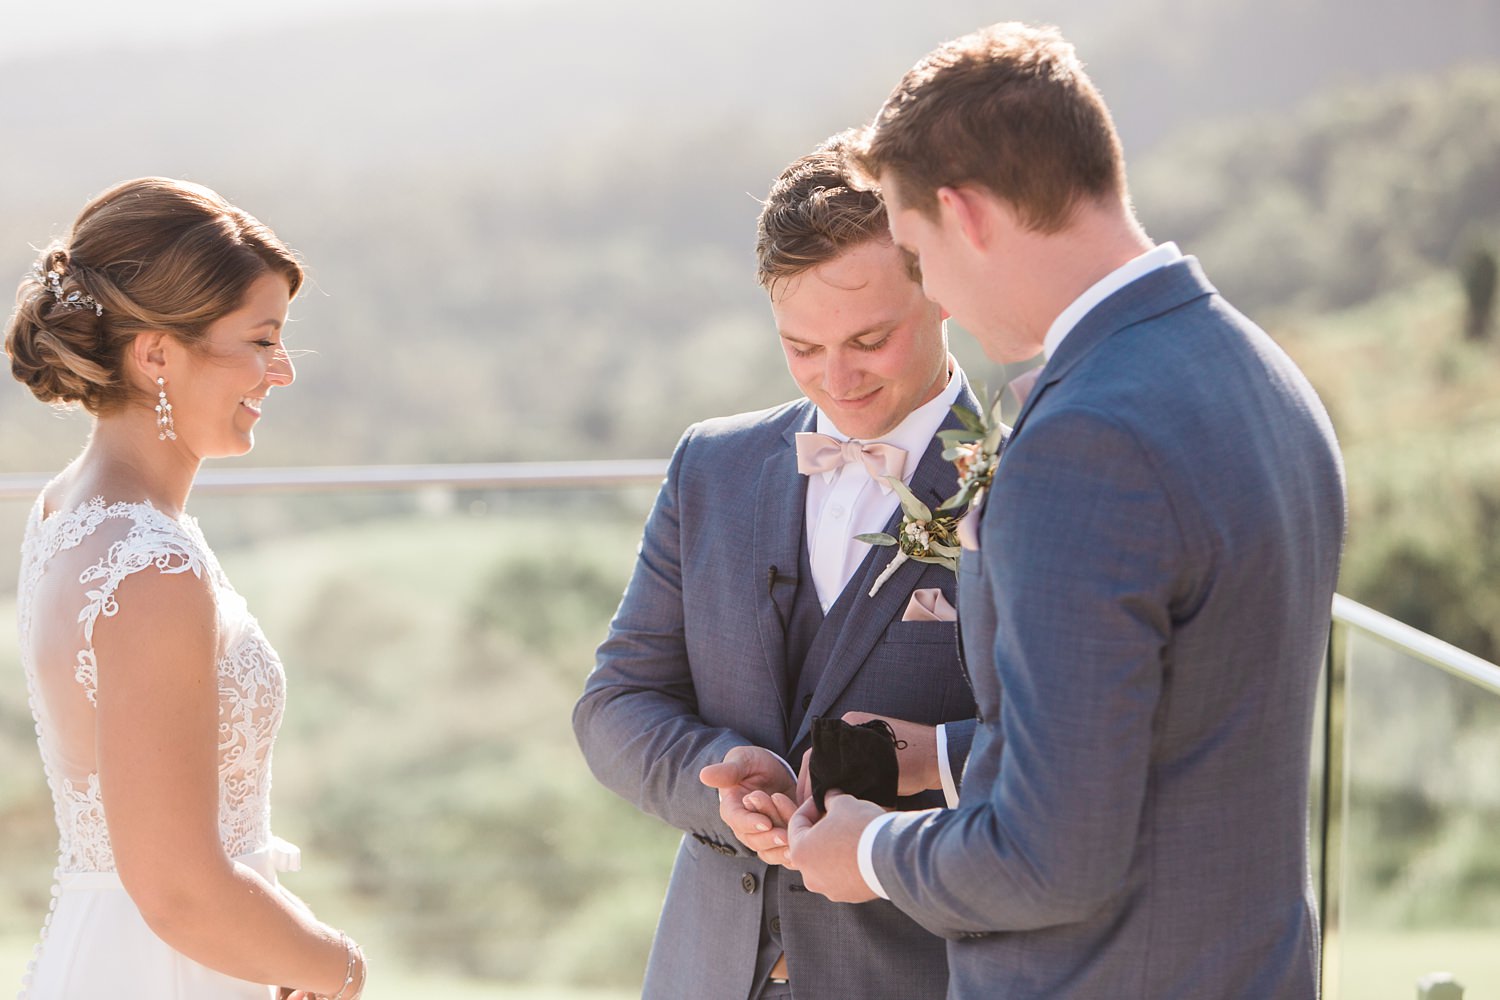 The old dairy maleny wedding by mario colli photography